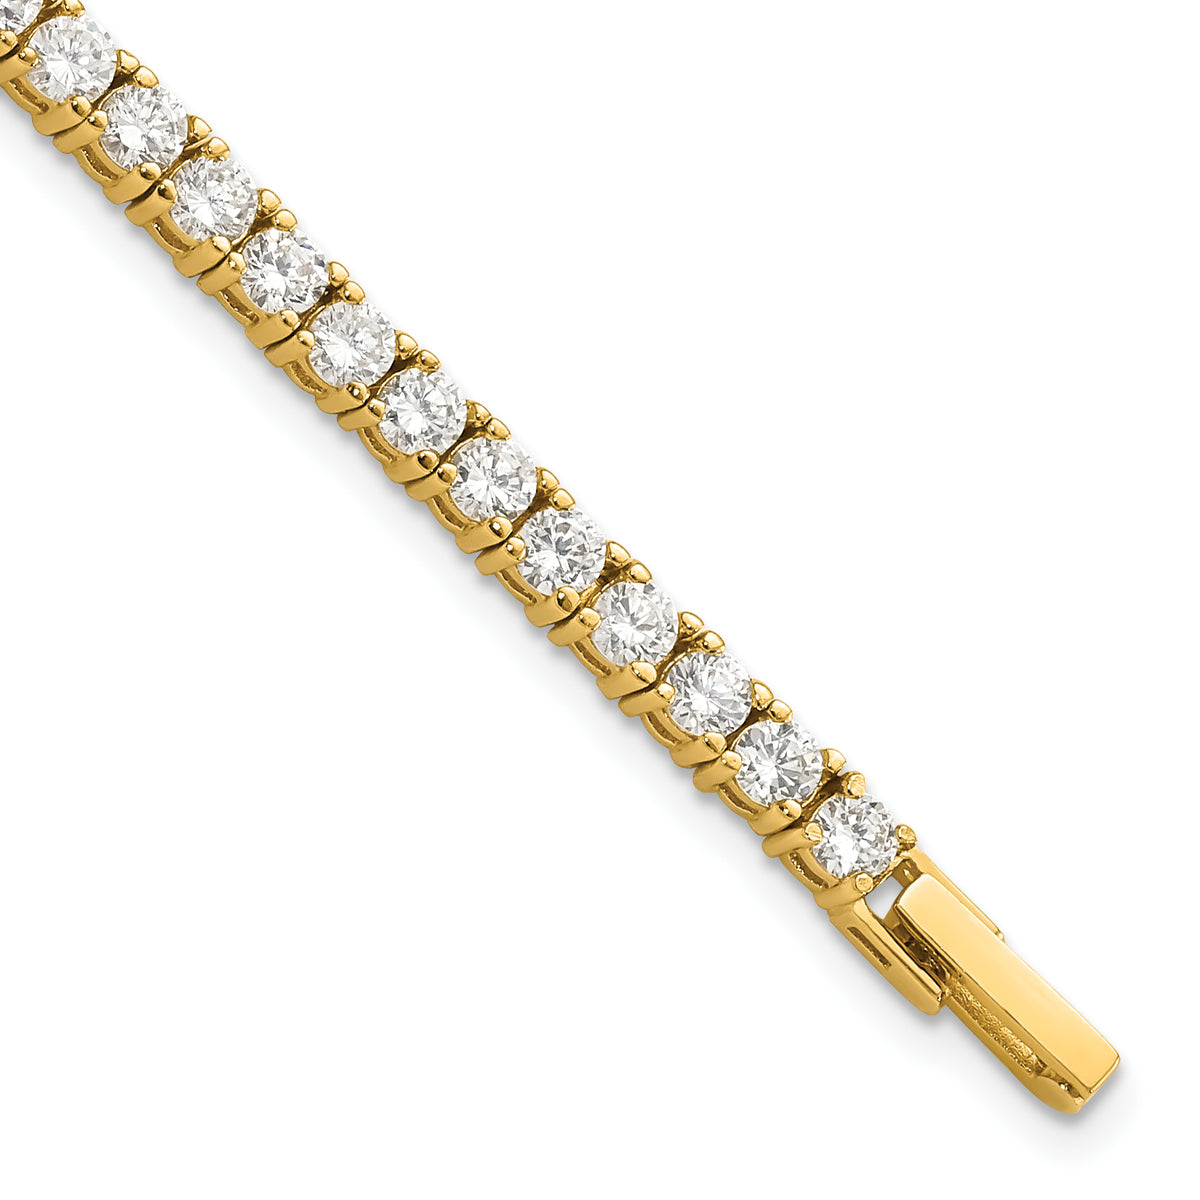 Kelly Waters Gold-plated Prong Set CZ 7.25 inch Tennis Bracelet